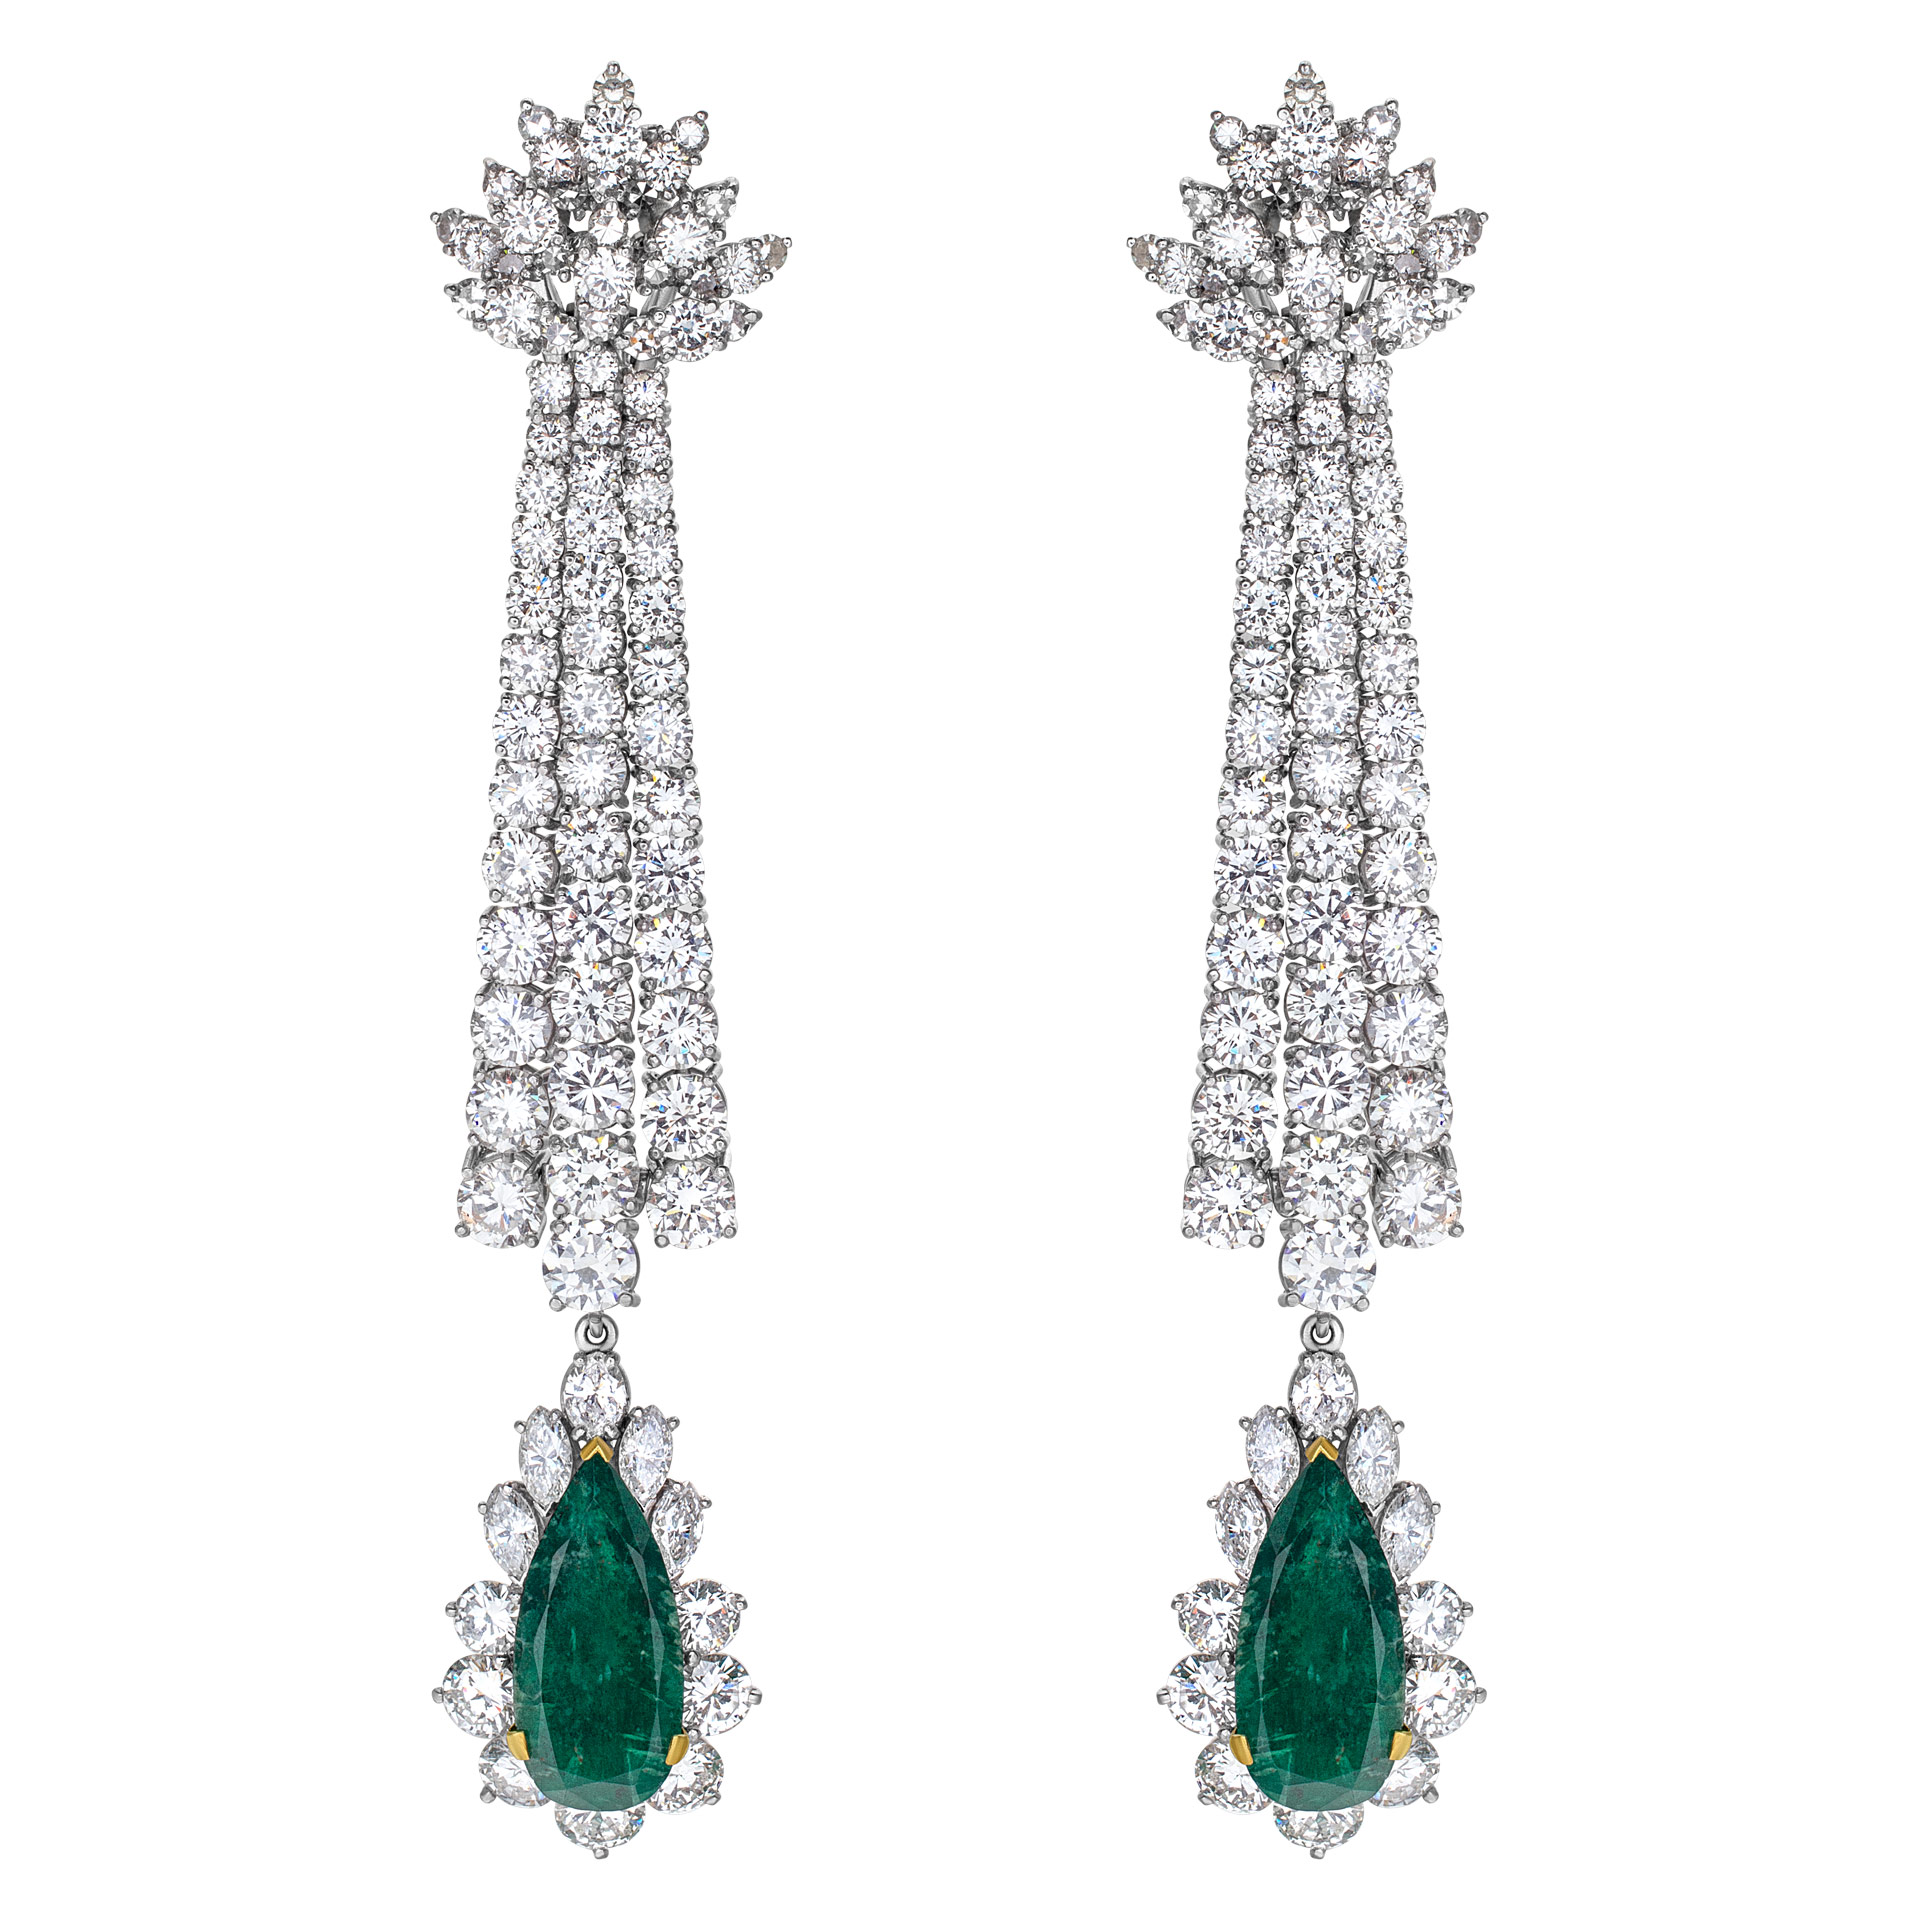 Drop diamond earrings with pear shaped emerald in platinum. 20 carats in diamonds, 9 carats in emeralds